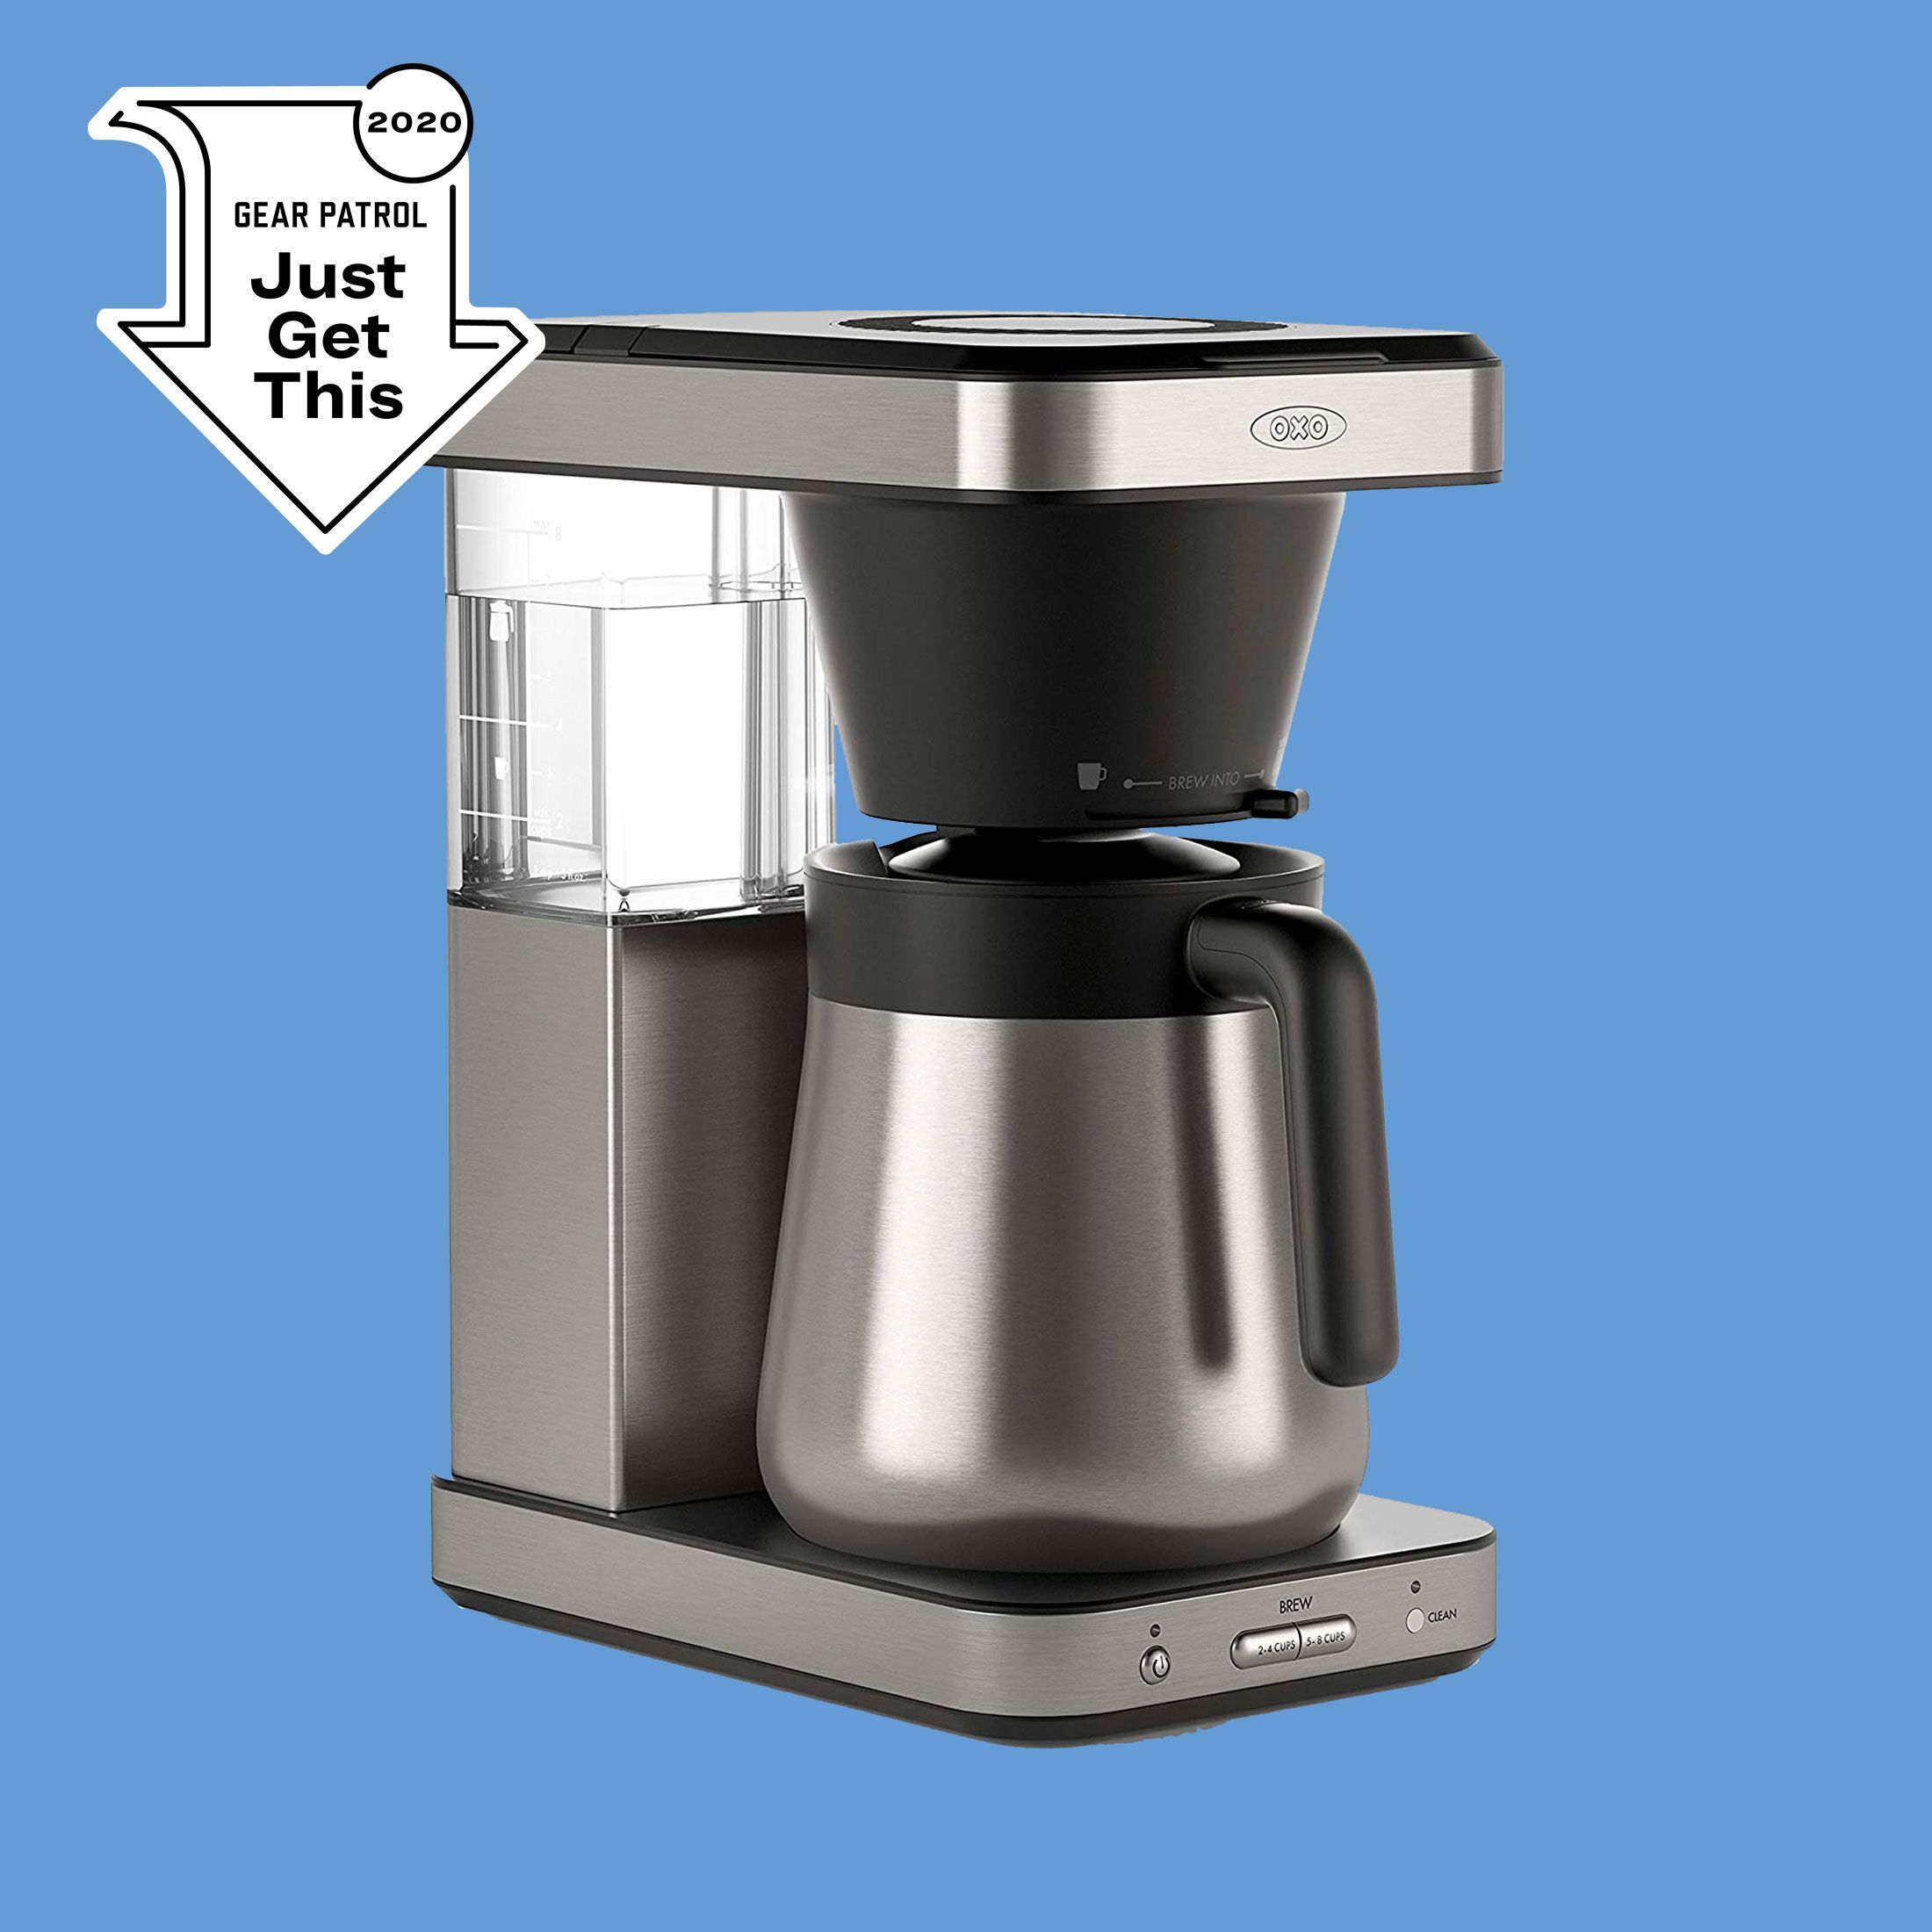 Looking for a Coffee Maker to Replace Your Keurig? Just Get This